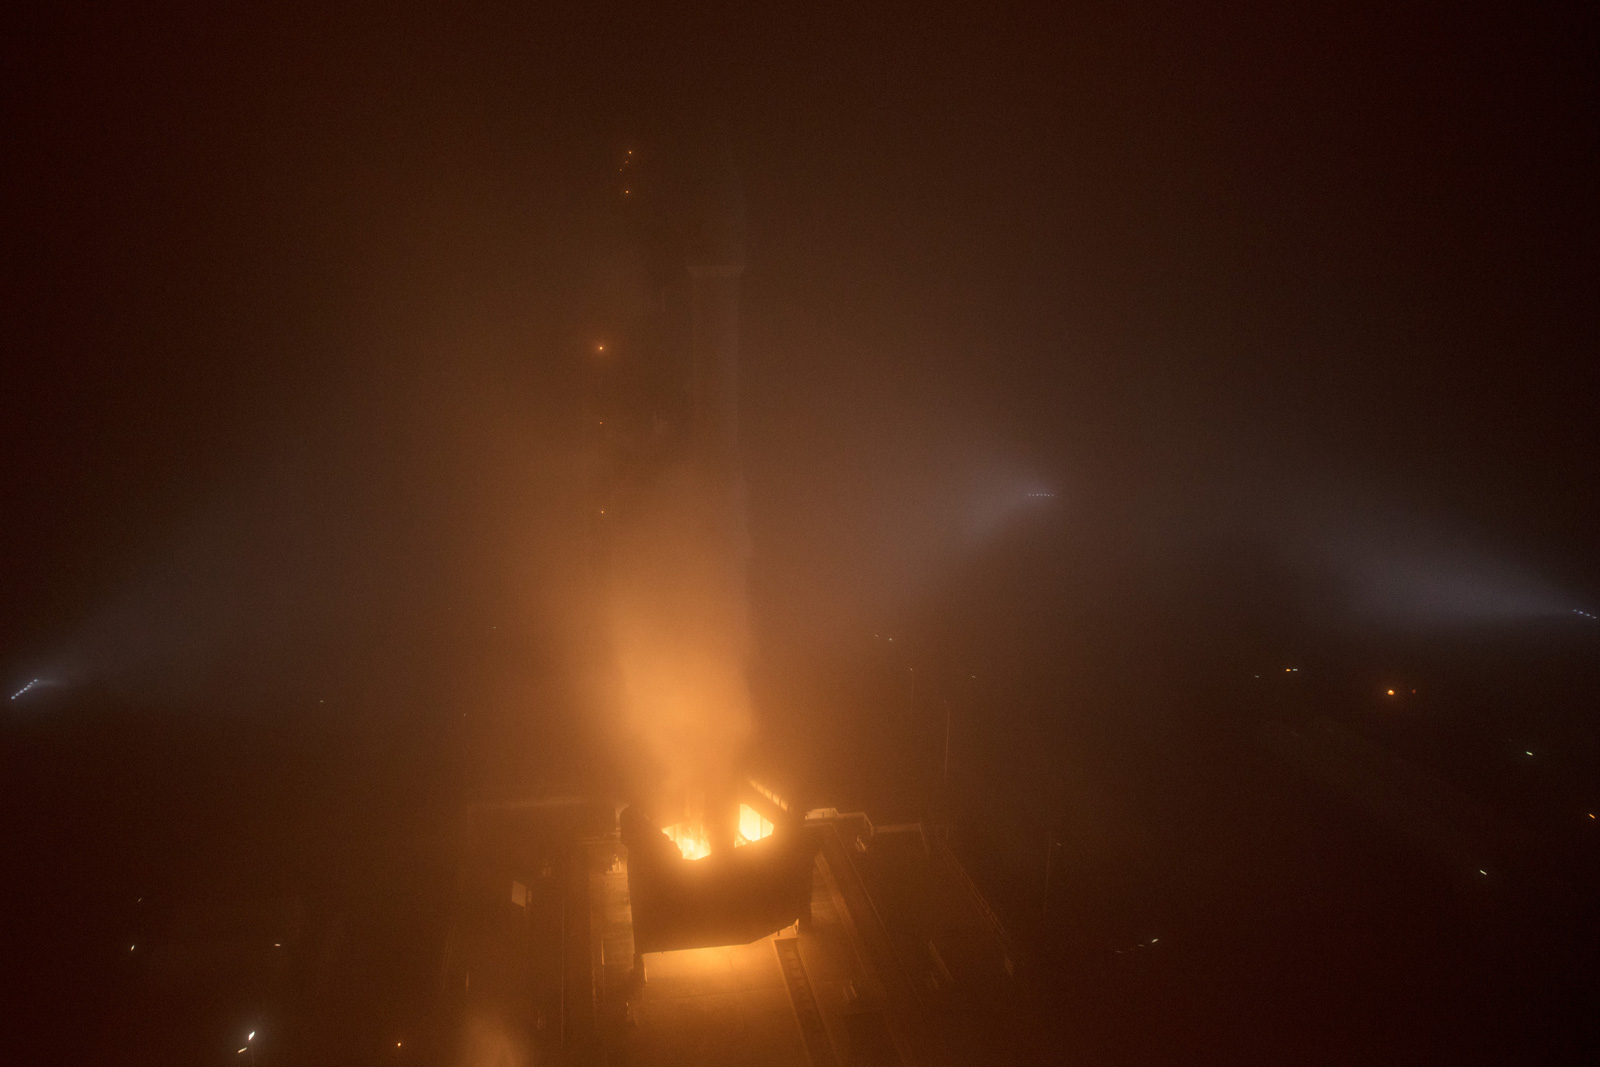 The NASA InSight spacecraft launches onboard a United Launch Alliance Atlas-V rocket, Saturday, May 5, 2018, from Vandenberg Air Force Base in California. InSight, short for Interior Exploration using Seismic Investigations, Geodesy and Heat Transport, is a Mars lander designed to study the "inner space" of Mars: its crust, mantle, and core.